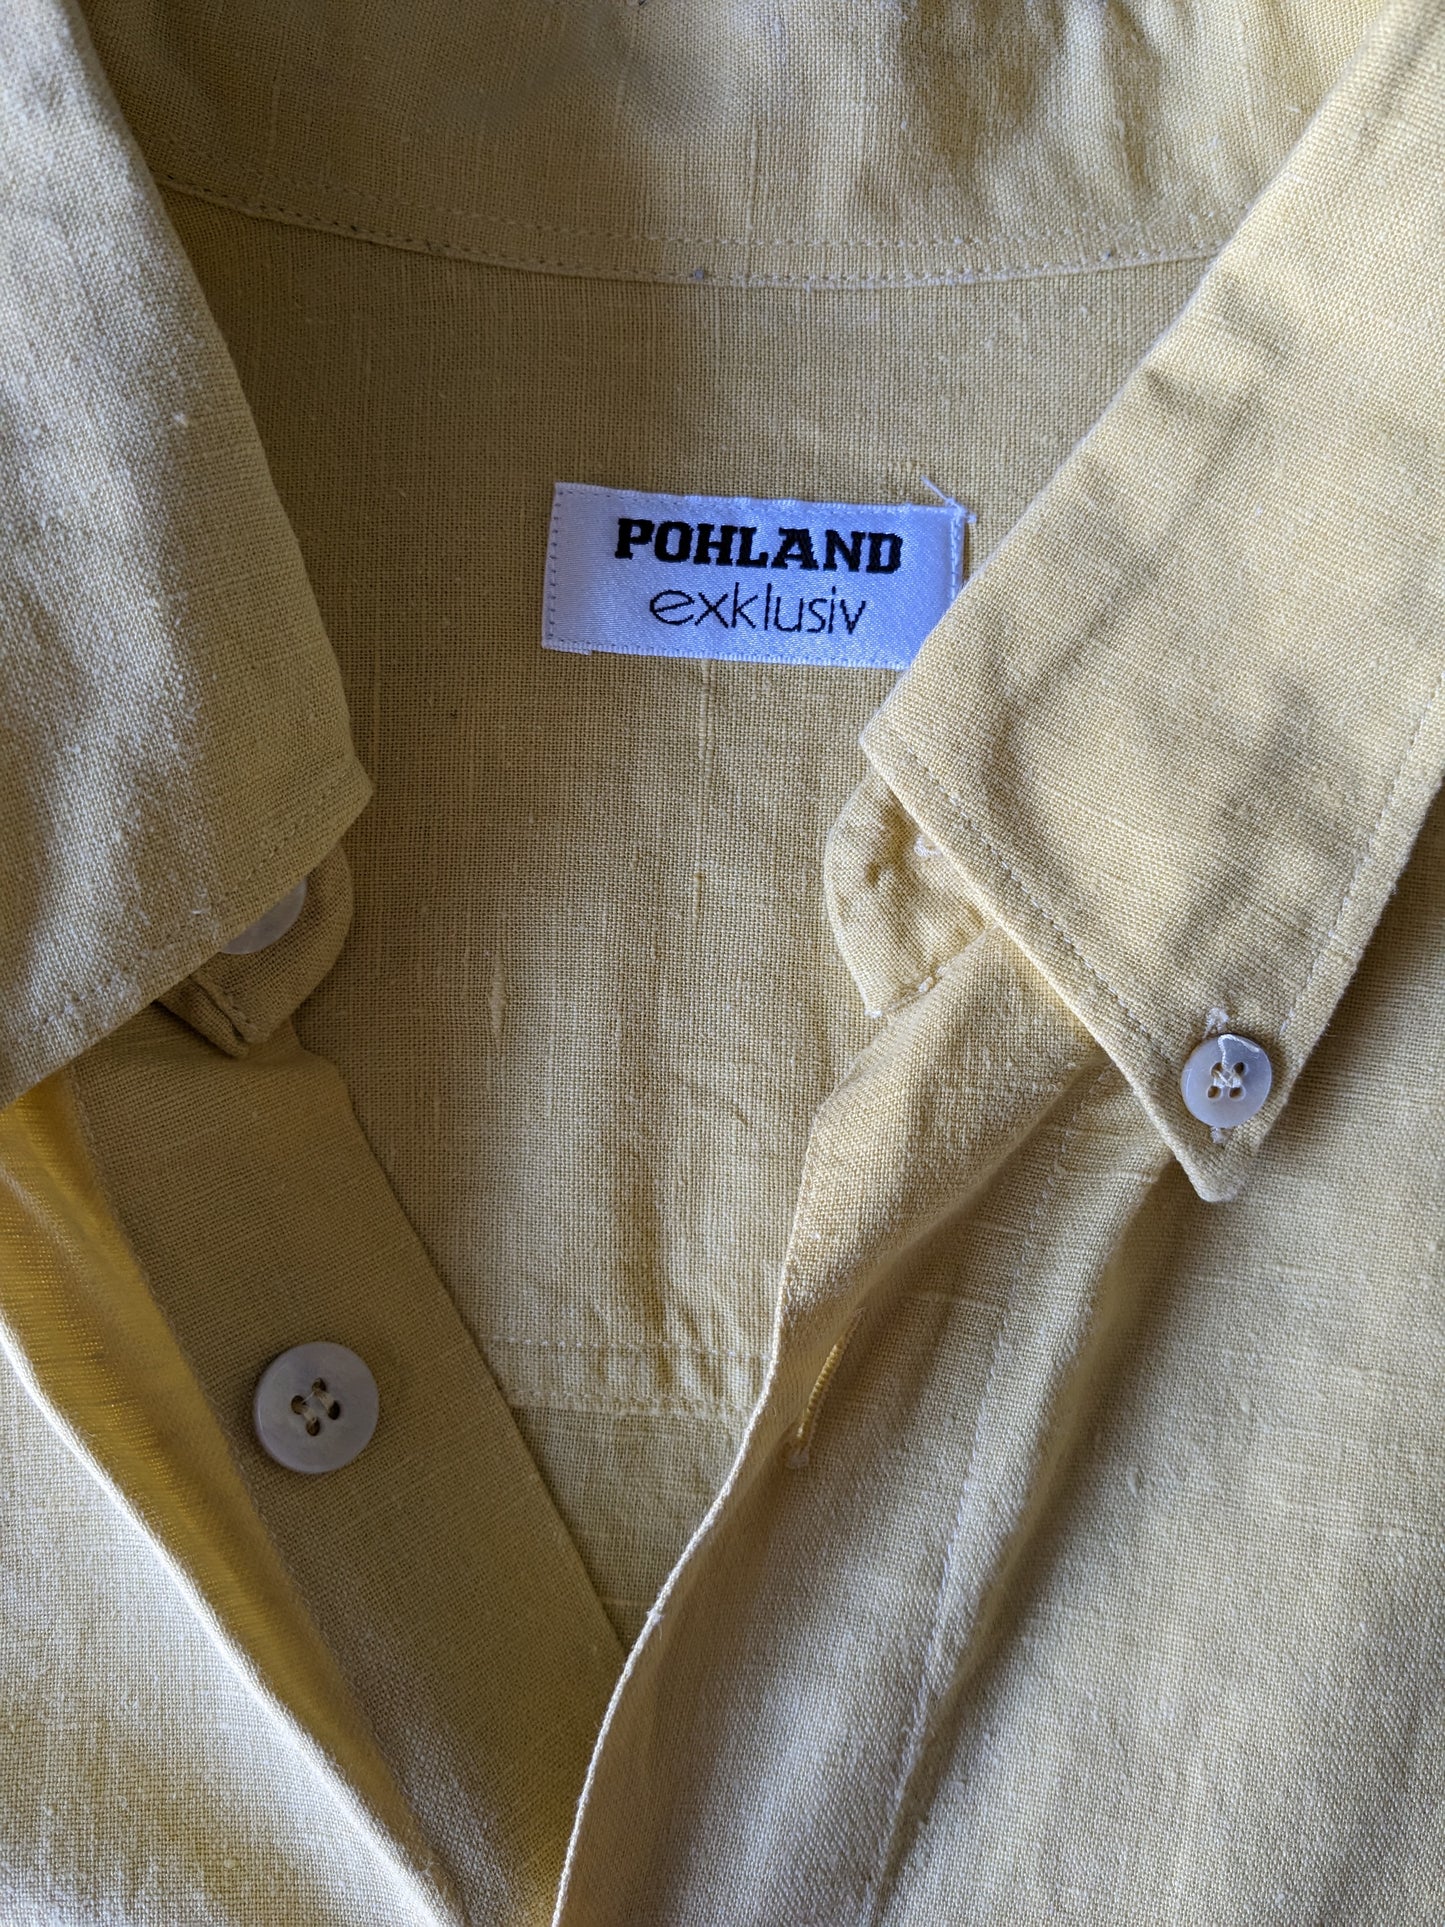 Vintage Pohland Exklusiv Linen Shirt with larger buttons. Yellow colored. Size 2XL / XXL.